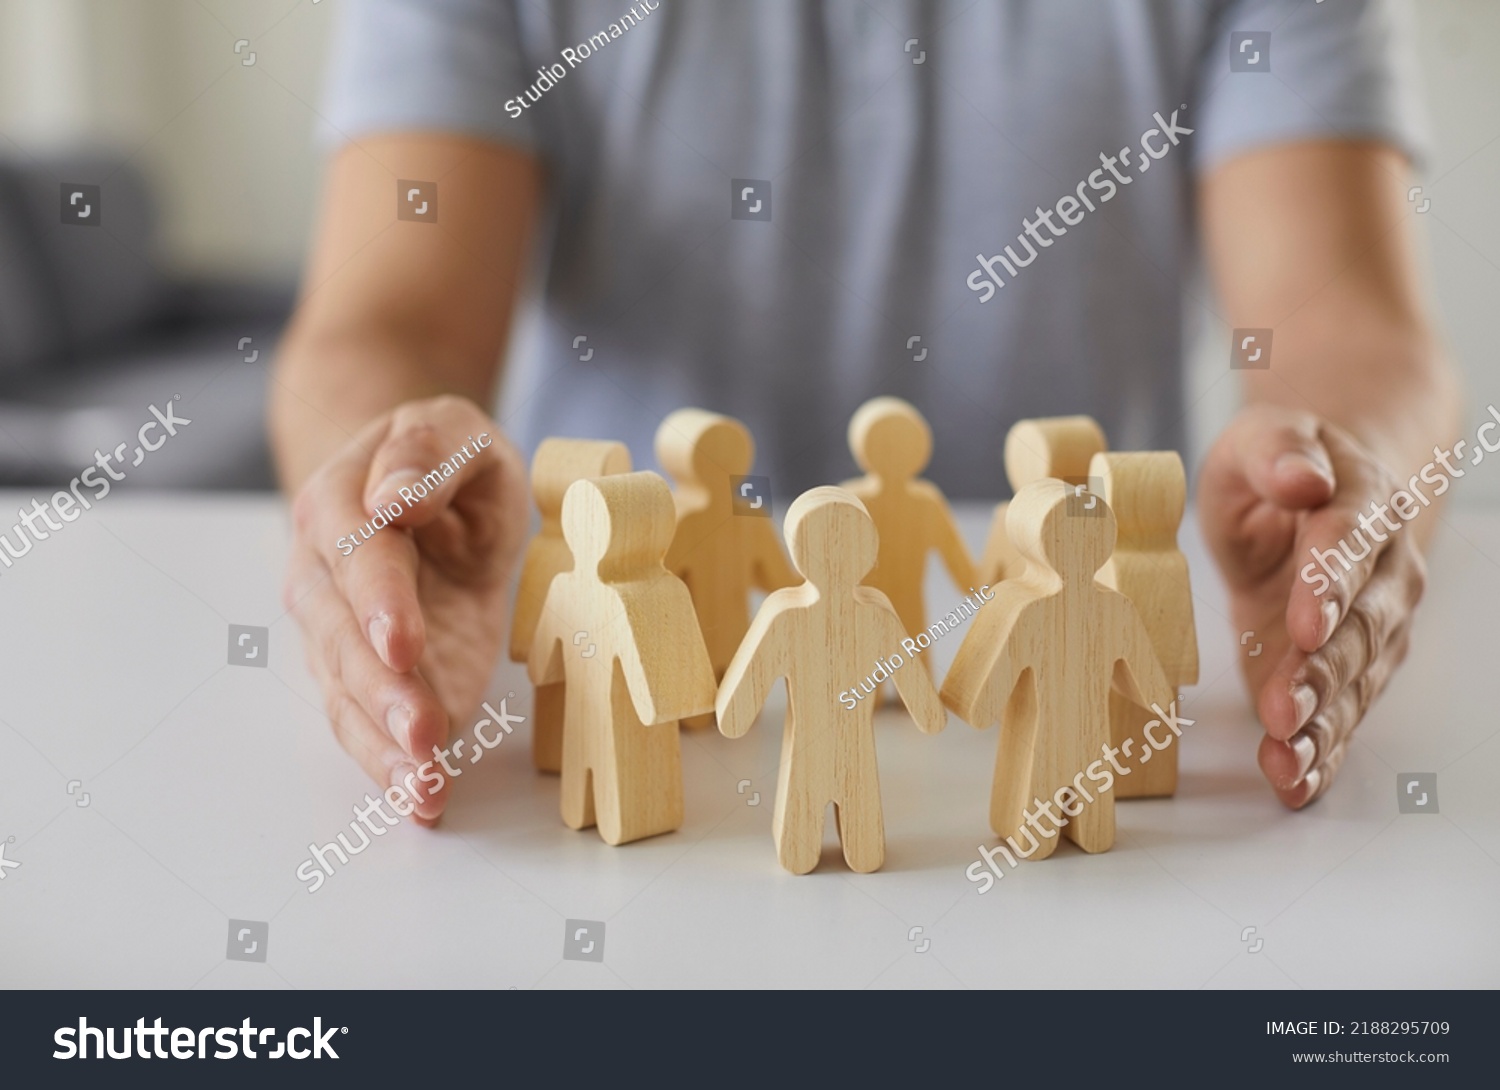 Social protection. Wooden figurines of people surrounded by man's hands symbolizing care for employees, customers or family. Close-up of figurines of people standing in circle on table and male #2188295709